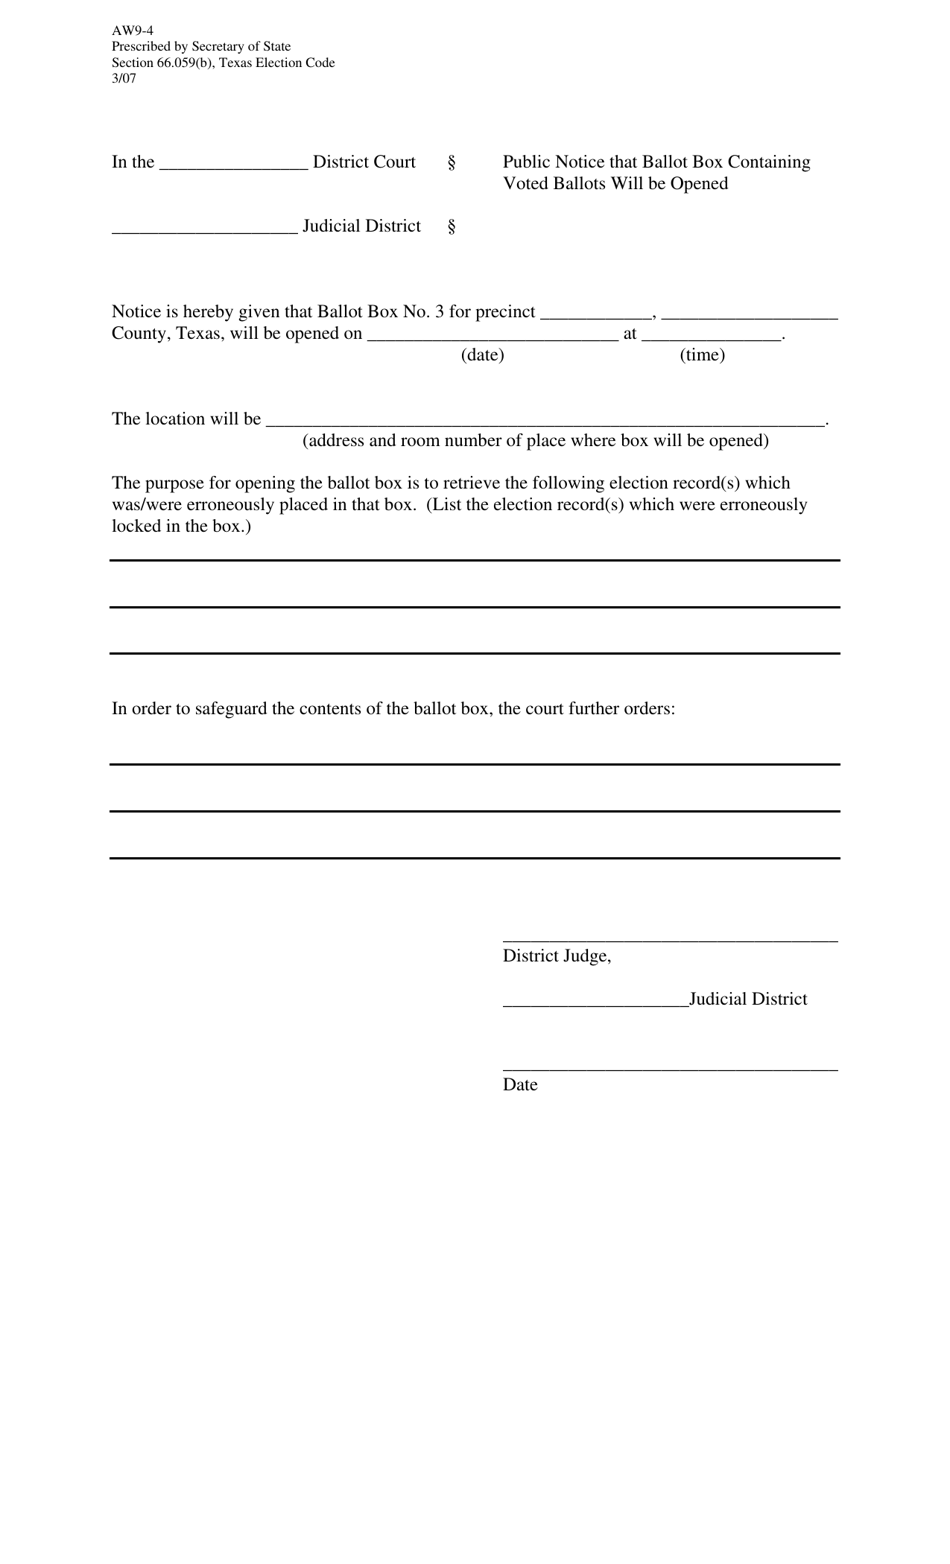 Form AW9-4 Public Notice of Ballot Box Opening - Texas, Page 1